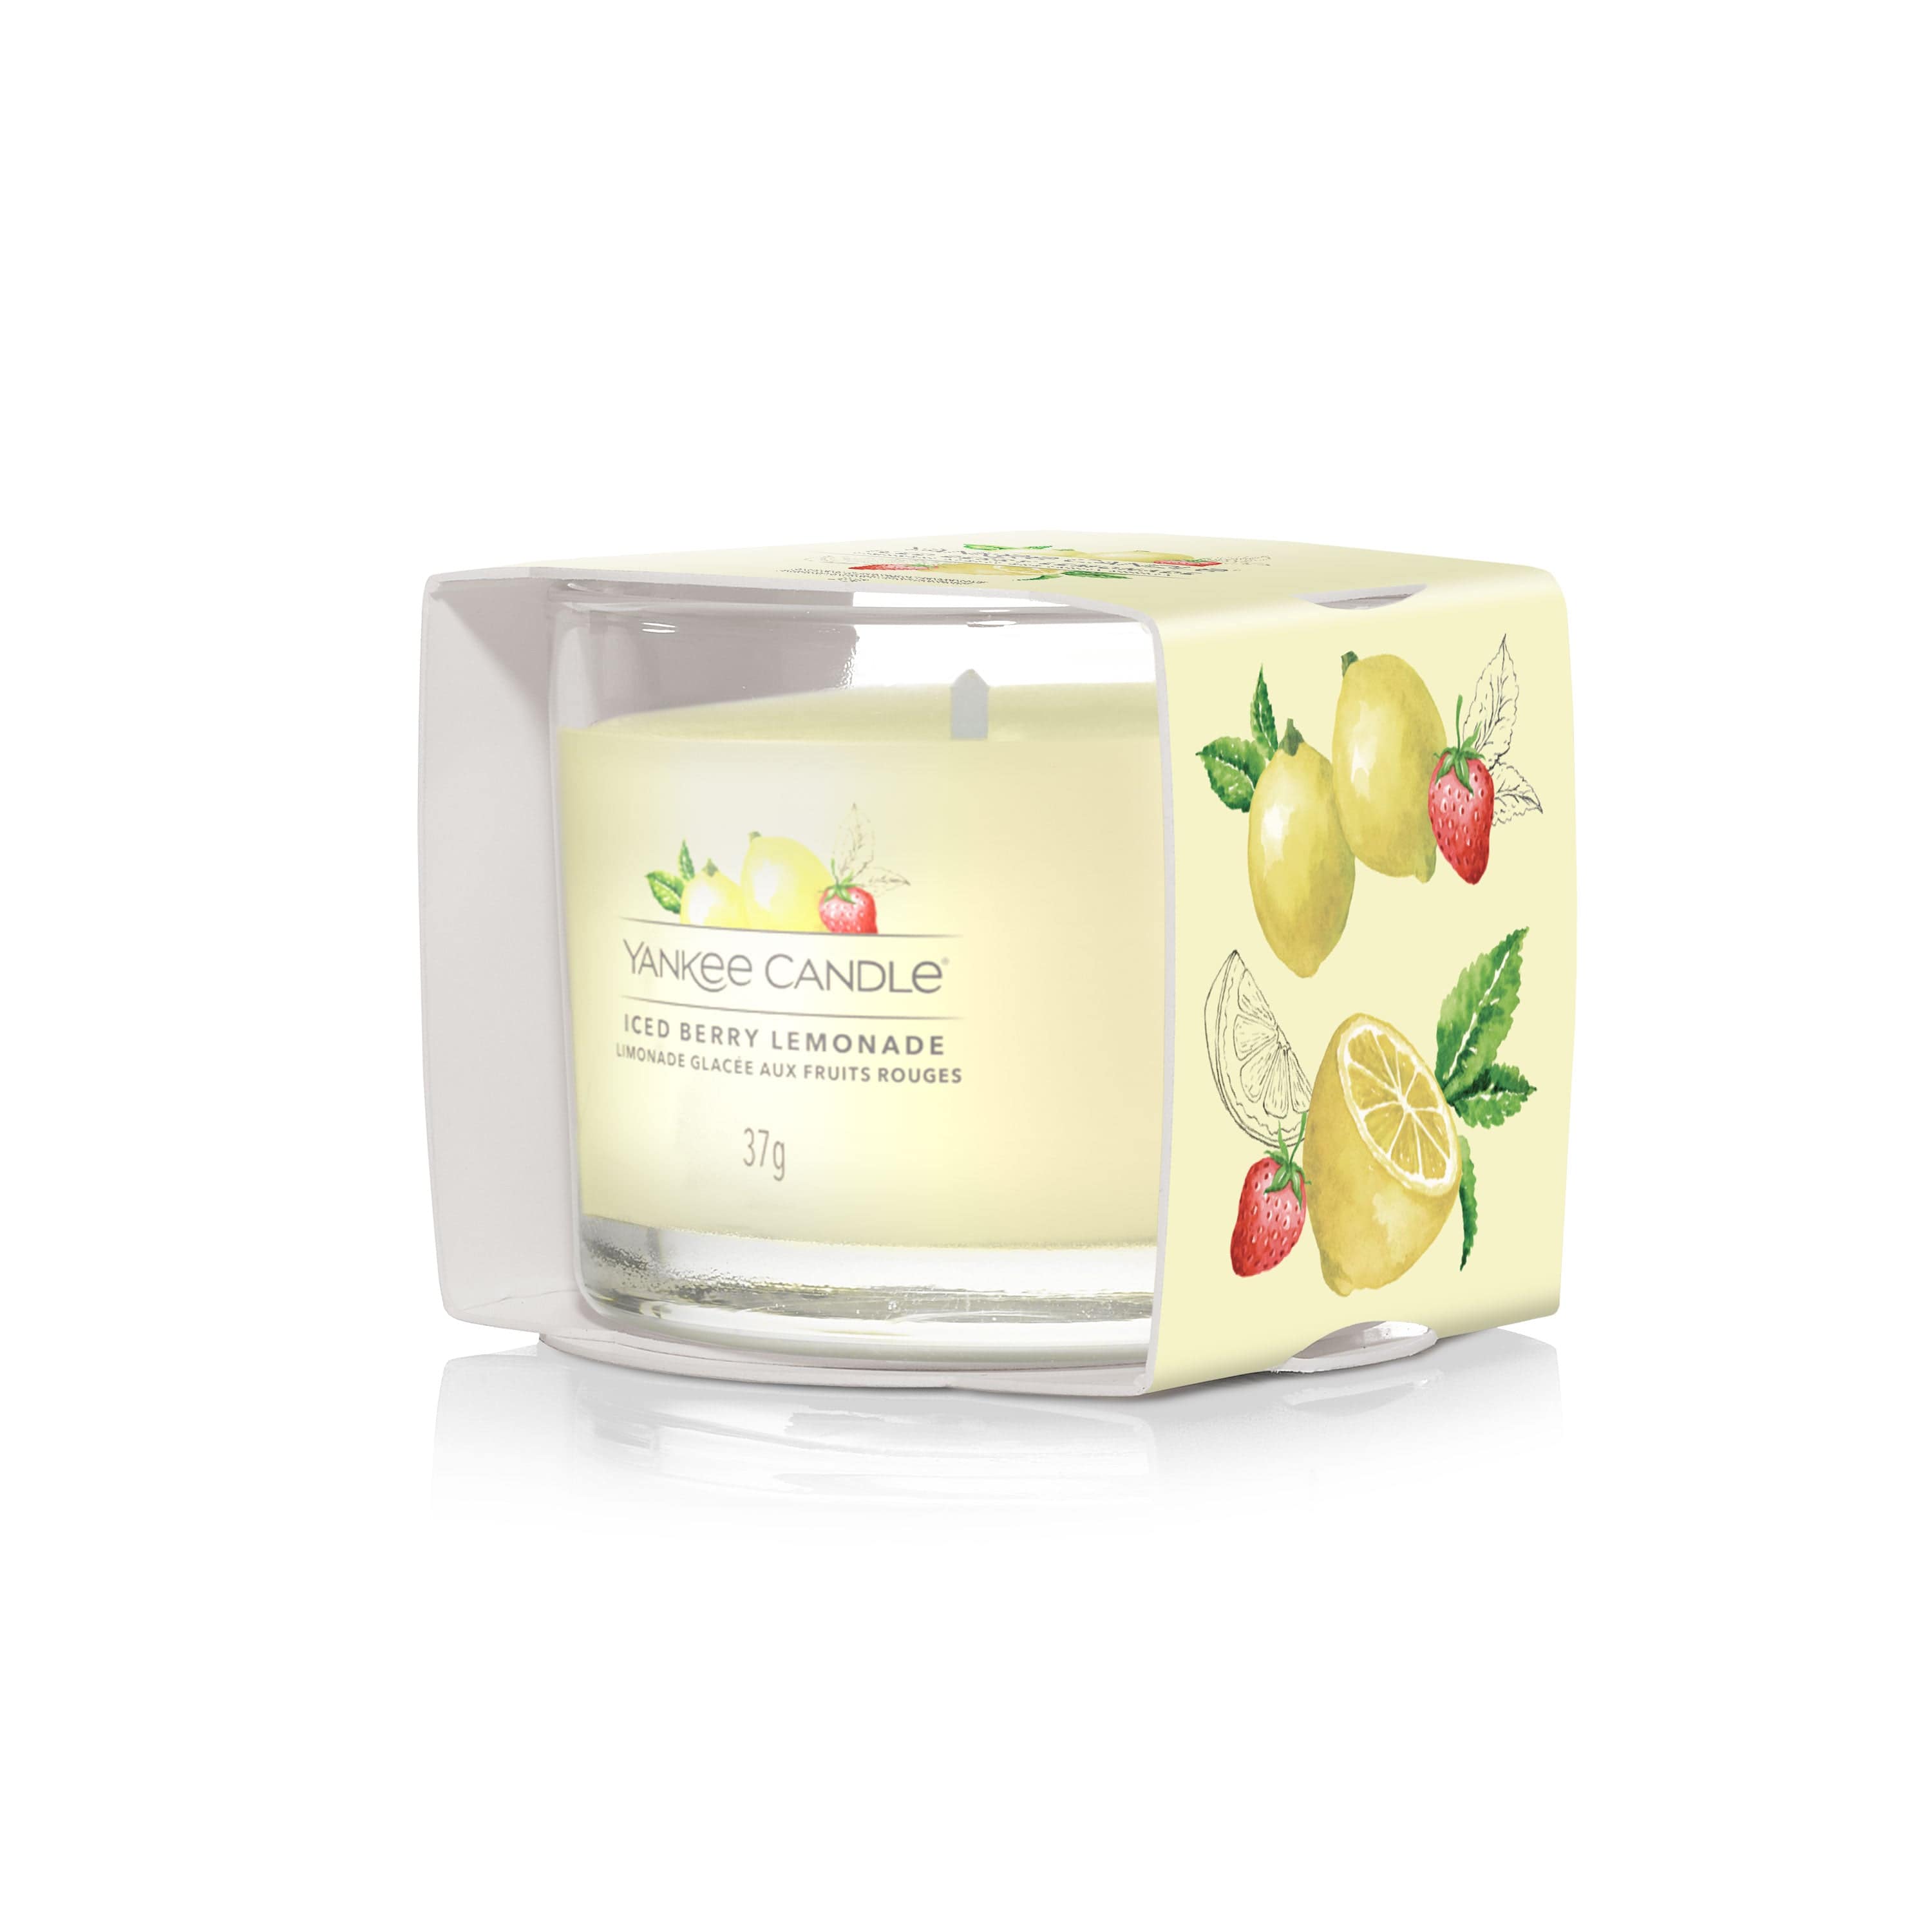 Yankee Candle Votive Candle Yankee Candle Filled Glass Votive - Iced Berry Lemonade